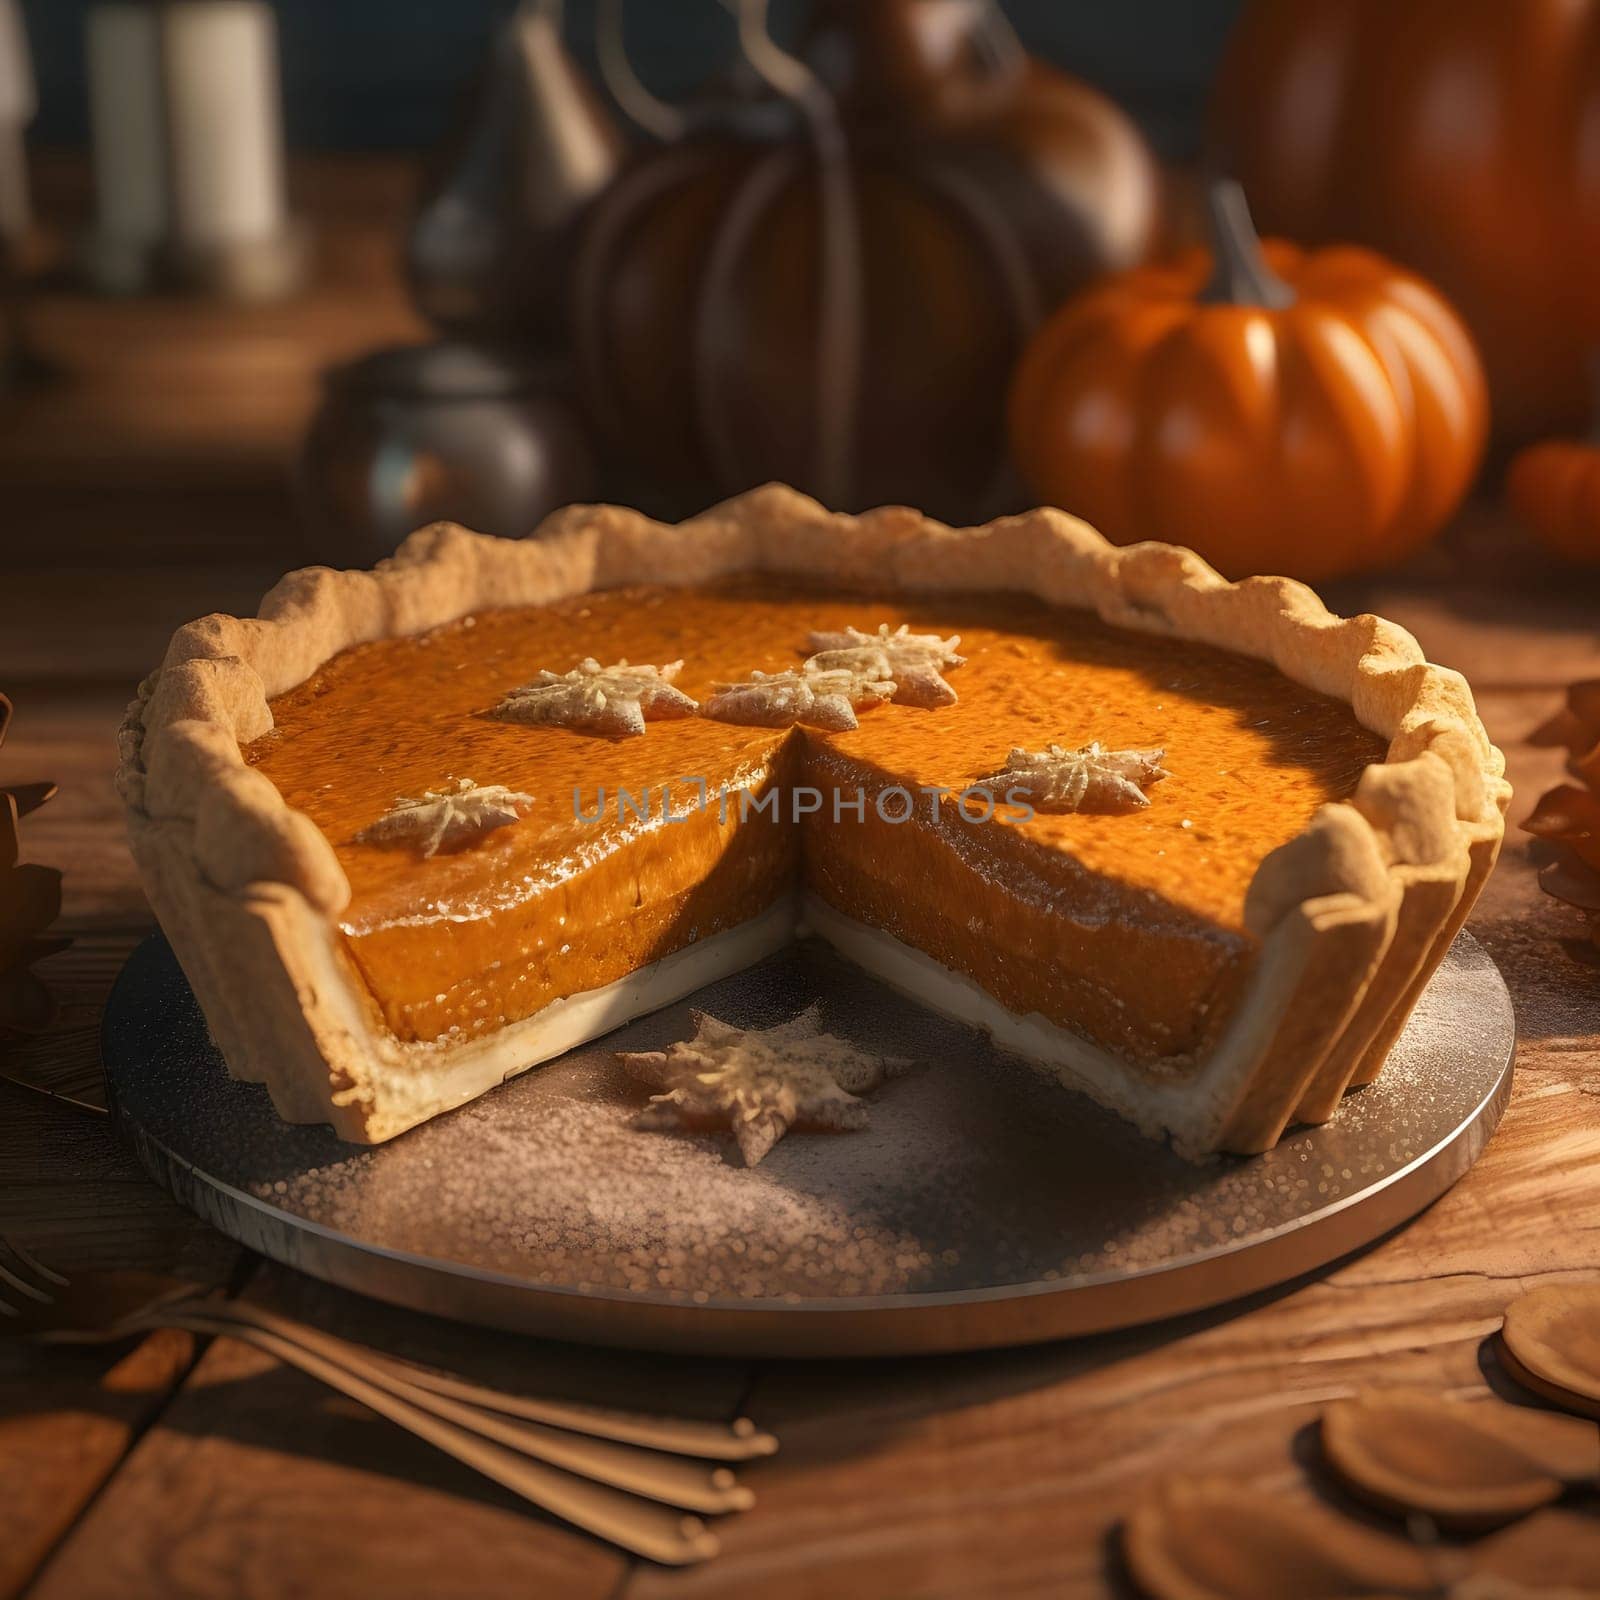 Pumpkin cake with stars, smeared pumpkins in the background. Pumpkin as a dish of thanksgiving for the harvest. The atmosphere of joy and celebration.